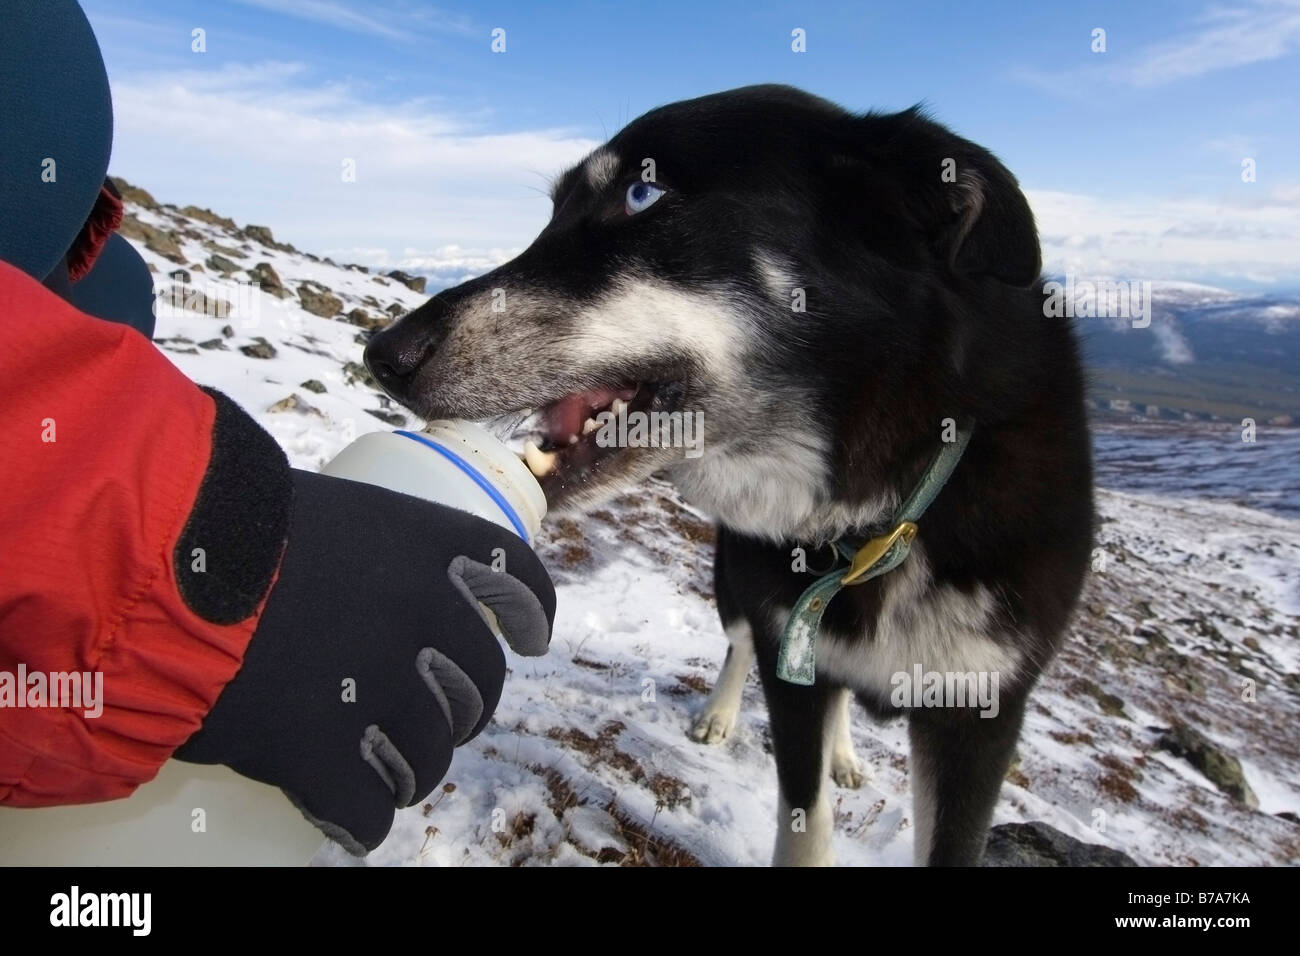 Blue eyed husky drinking water from a water bottle, Yukon Territory, Canada, North America Stock Photo